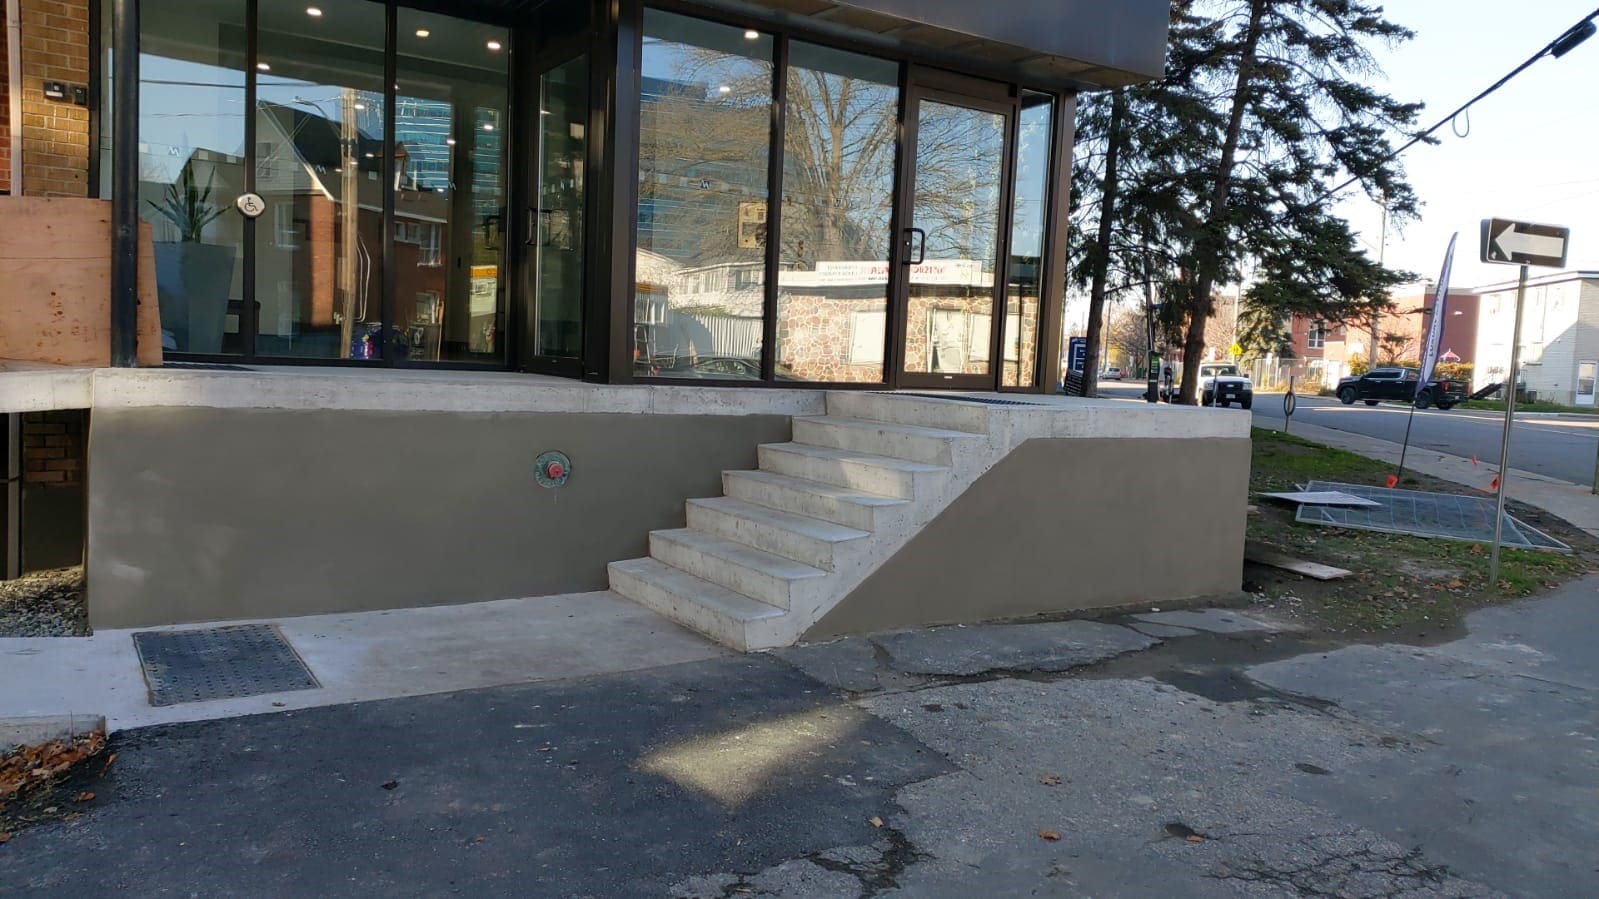 New stairs made of bricks and cement outside an office